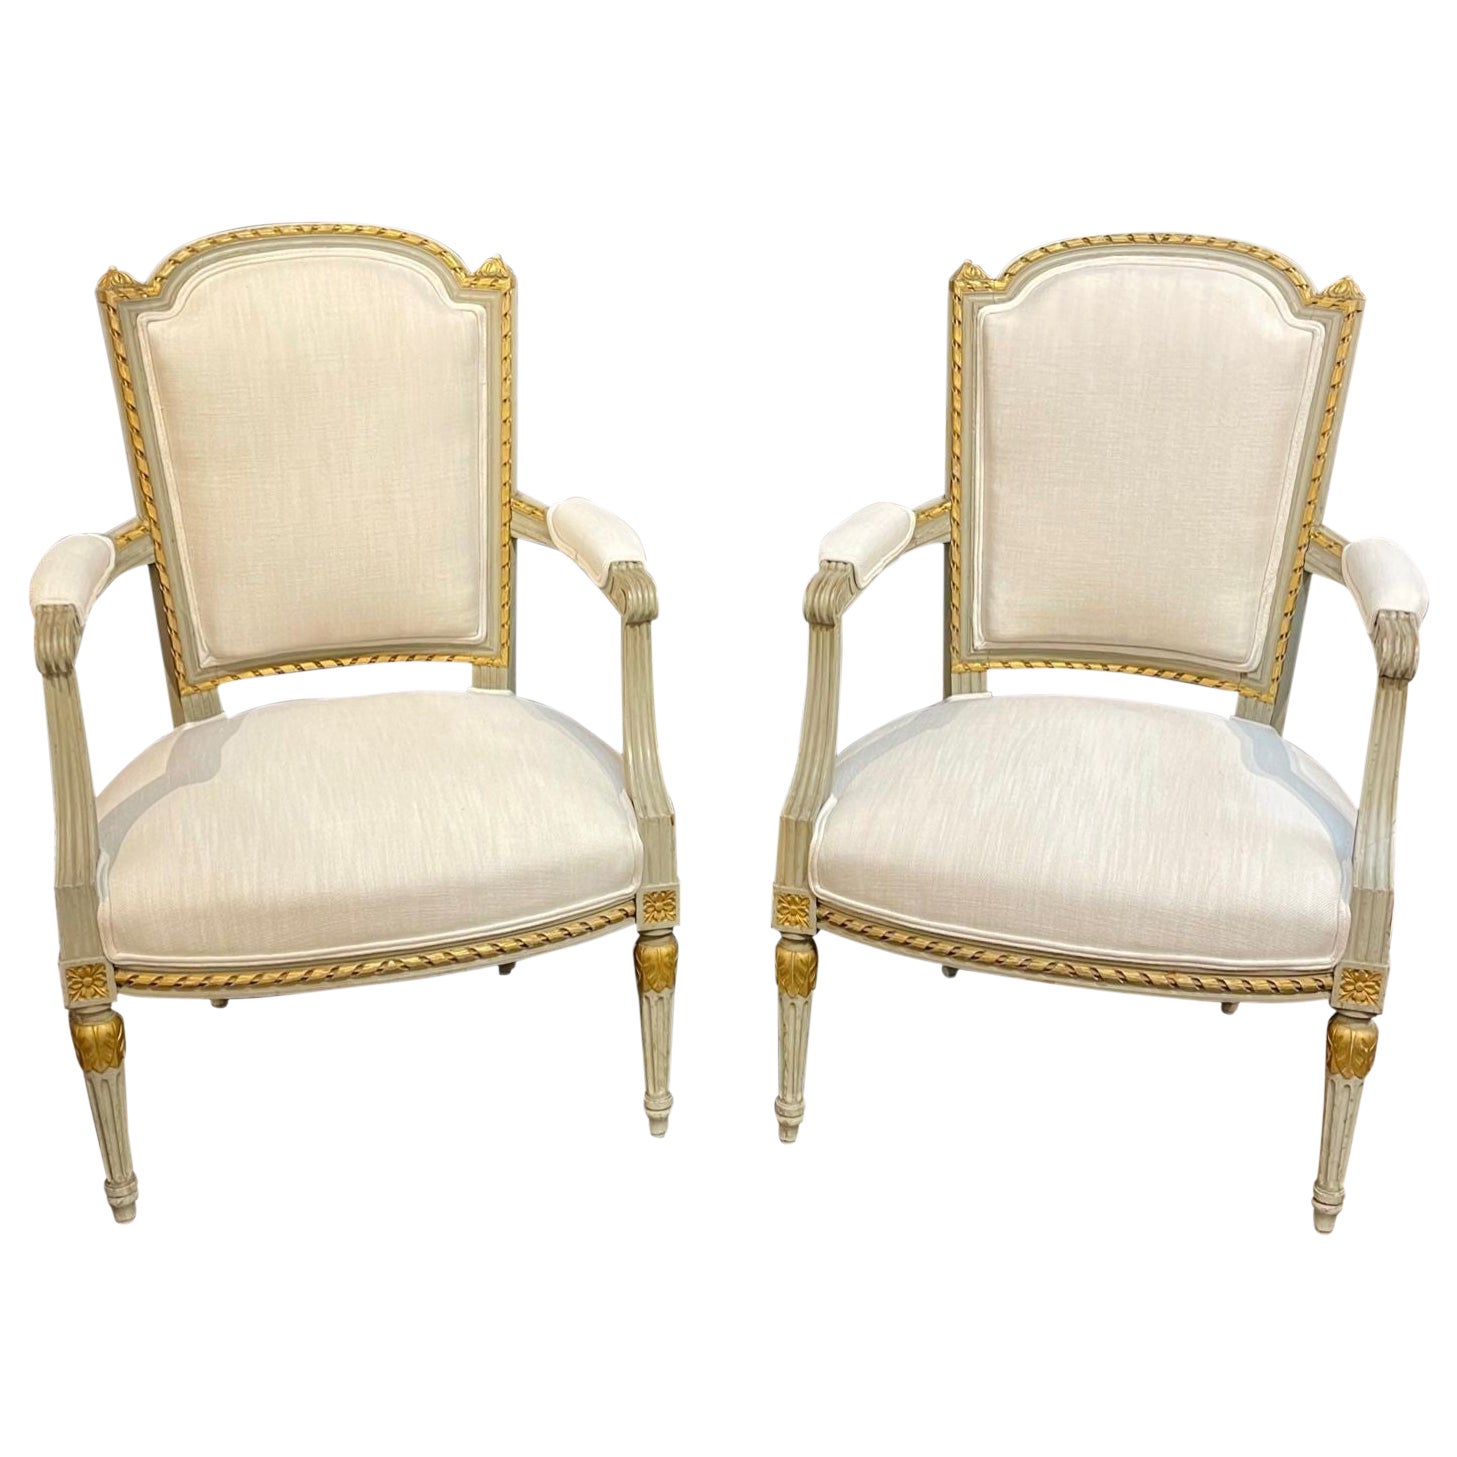 19th Century French Louis XVI Carved and Painted Chairs